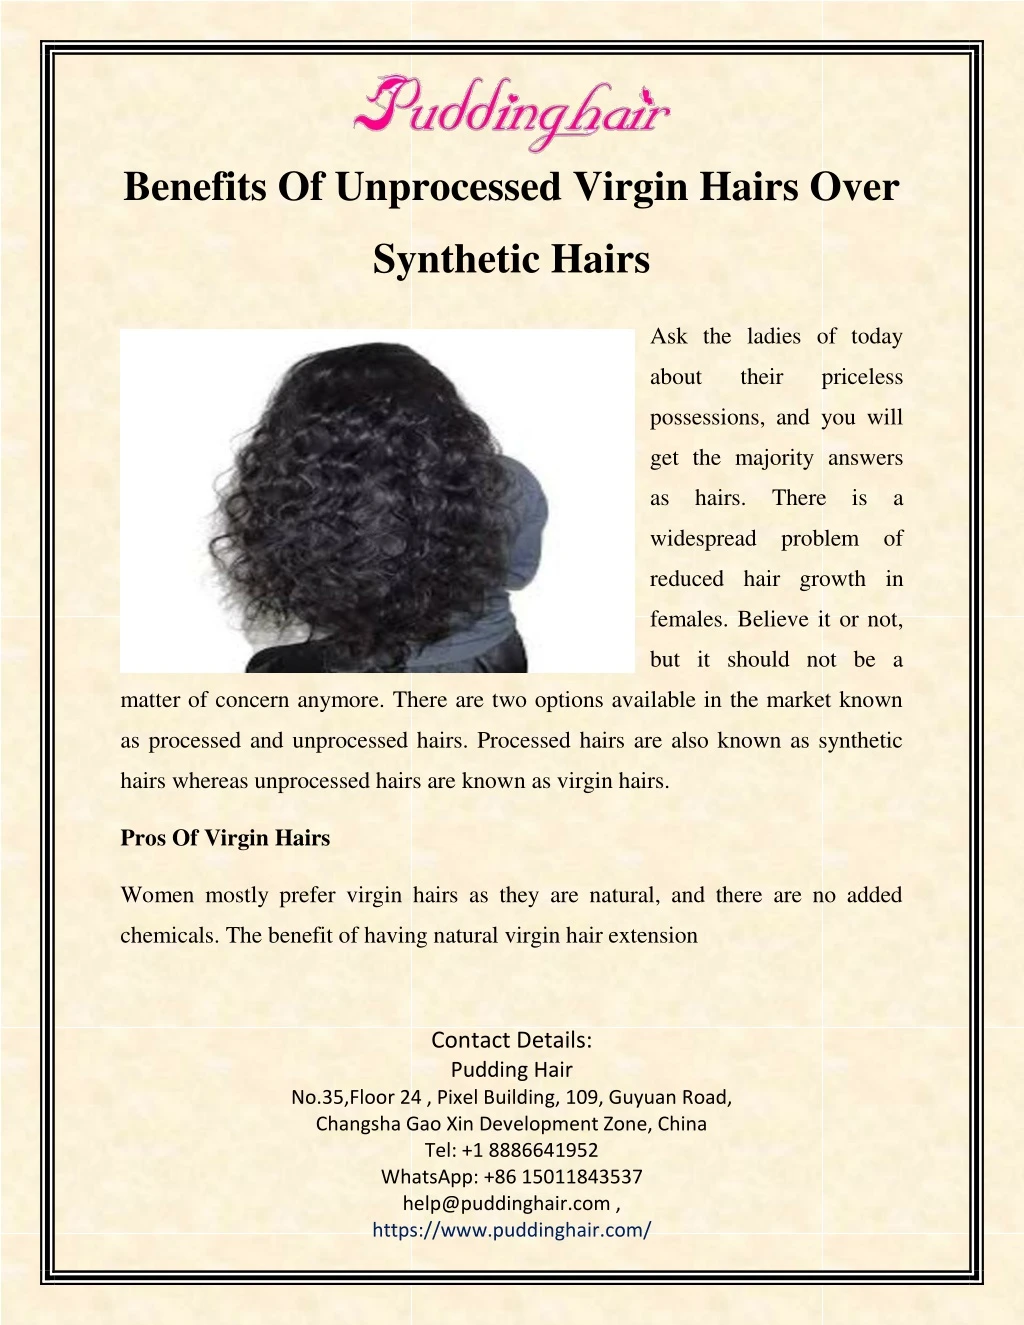 benefits of unprocessed virgin hairs over